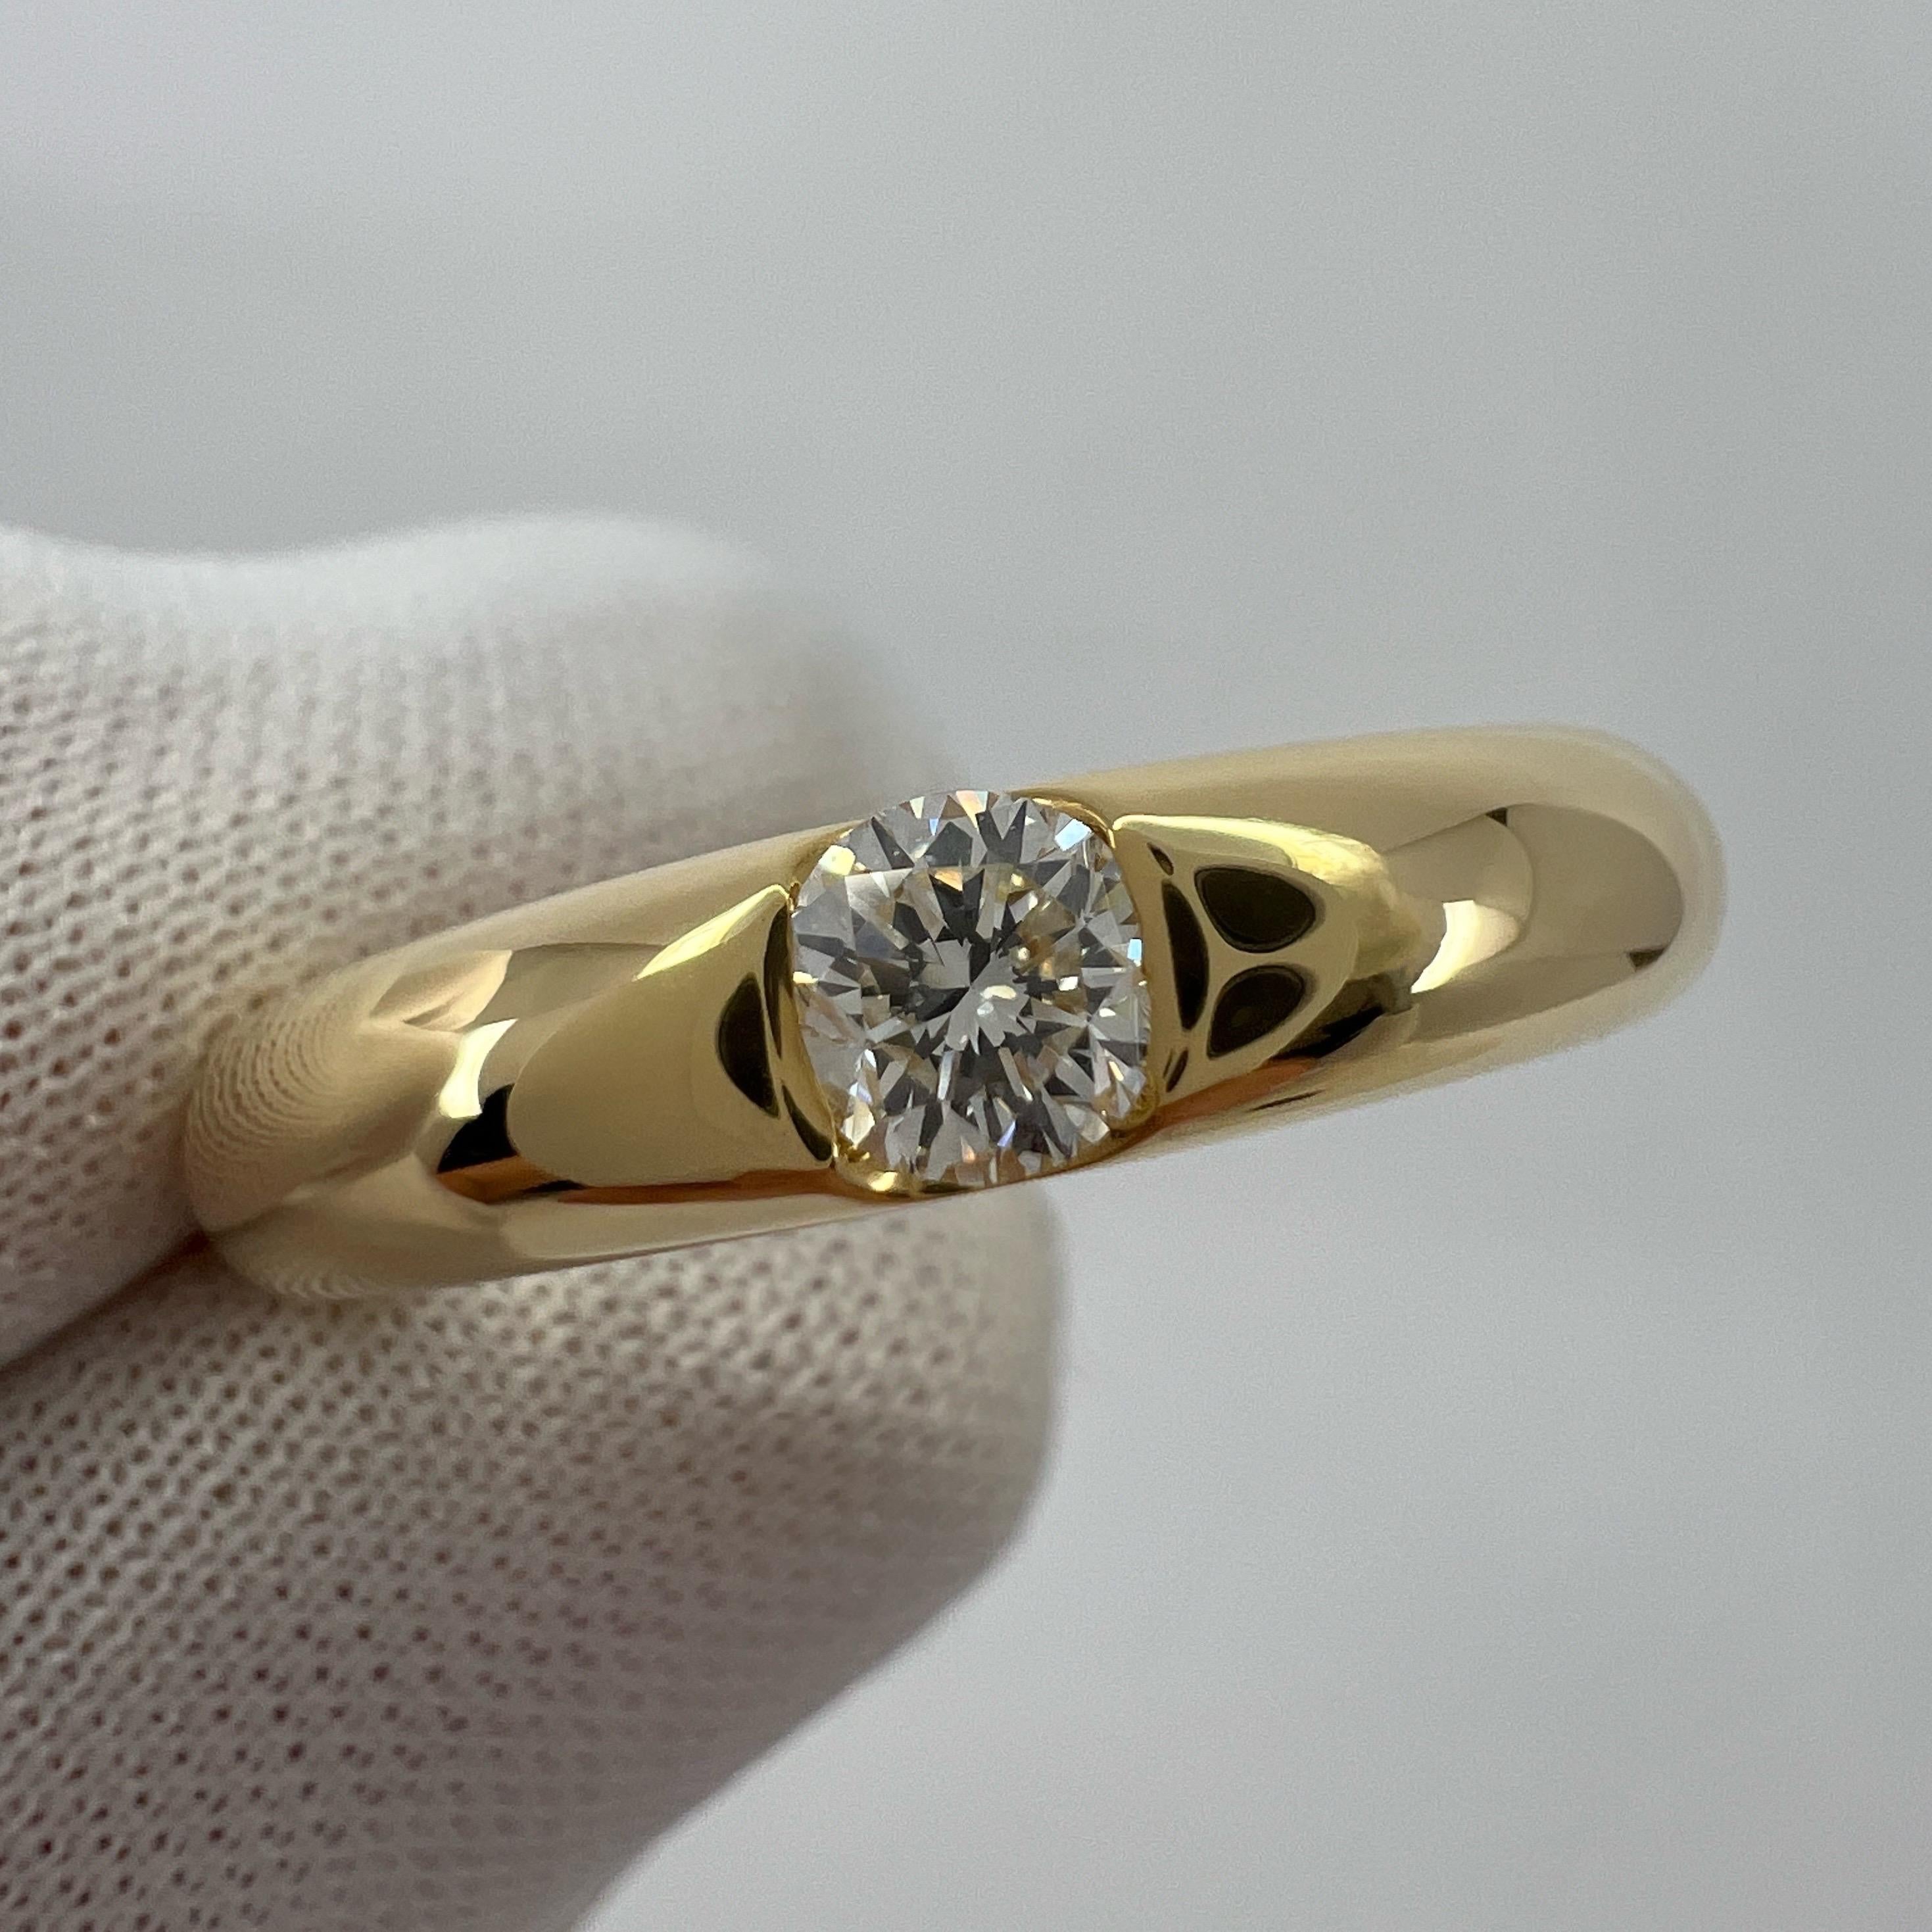 Vintage Cartier Round Diamond Ellipse 18k Yellow Gold Solitaire Band Ring US5 49 For Sale 2